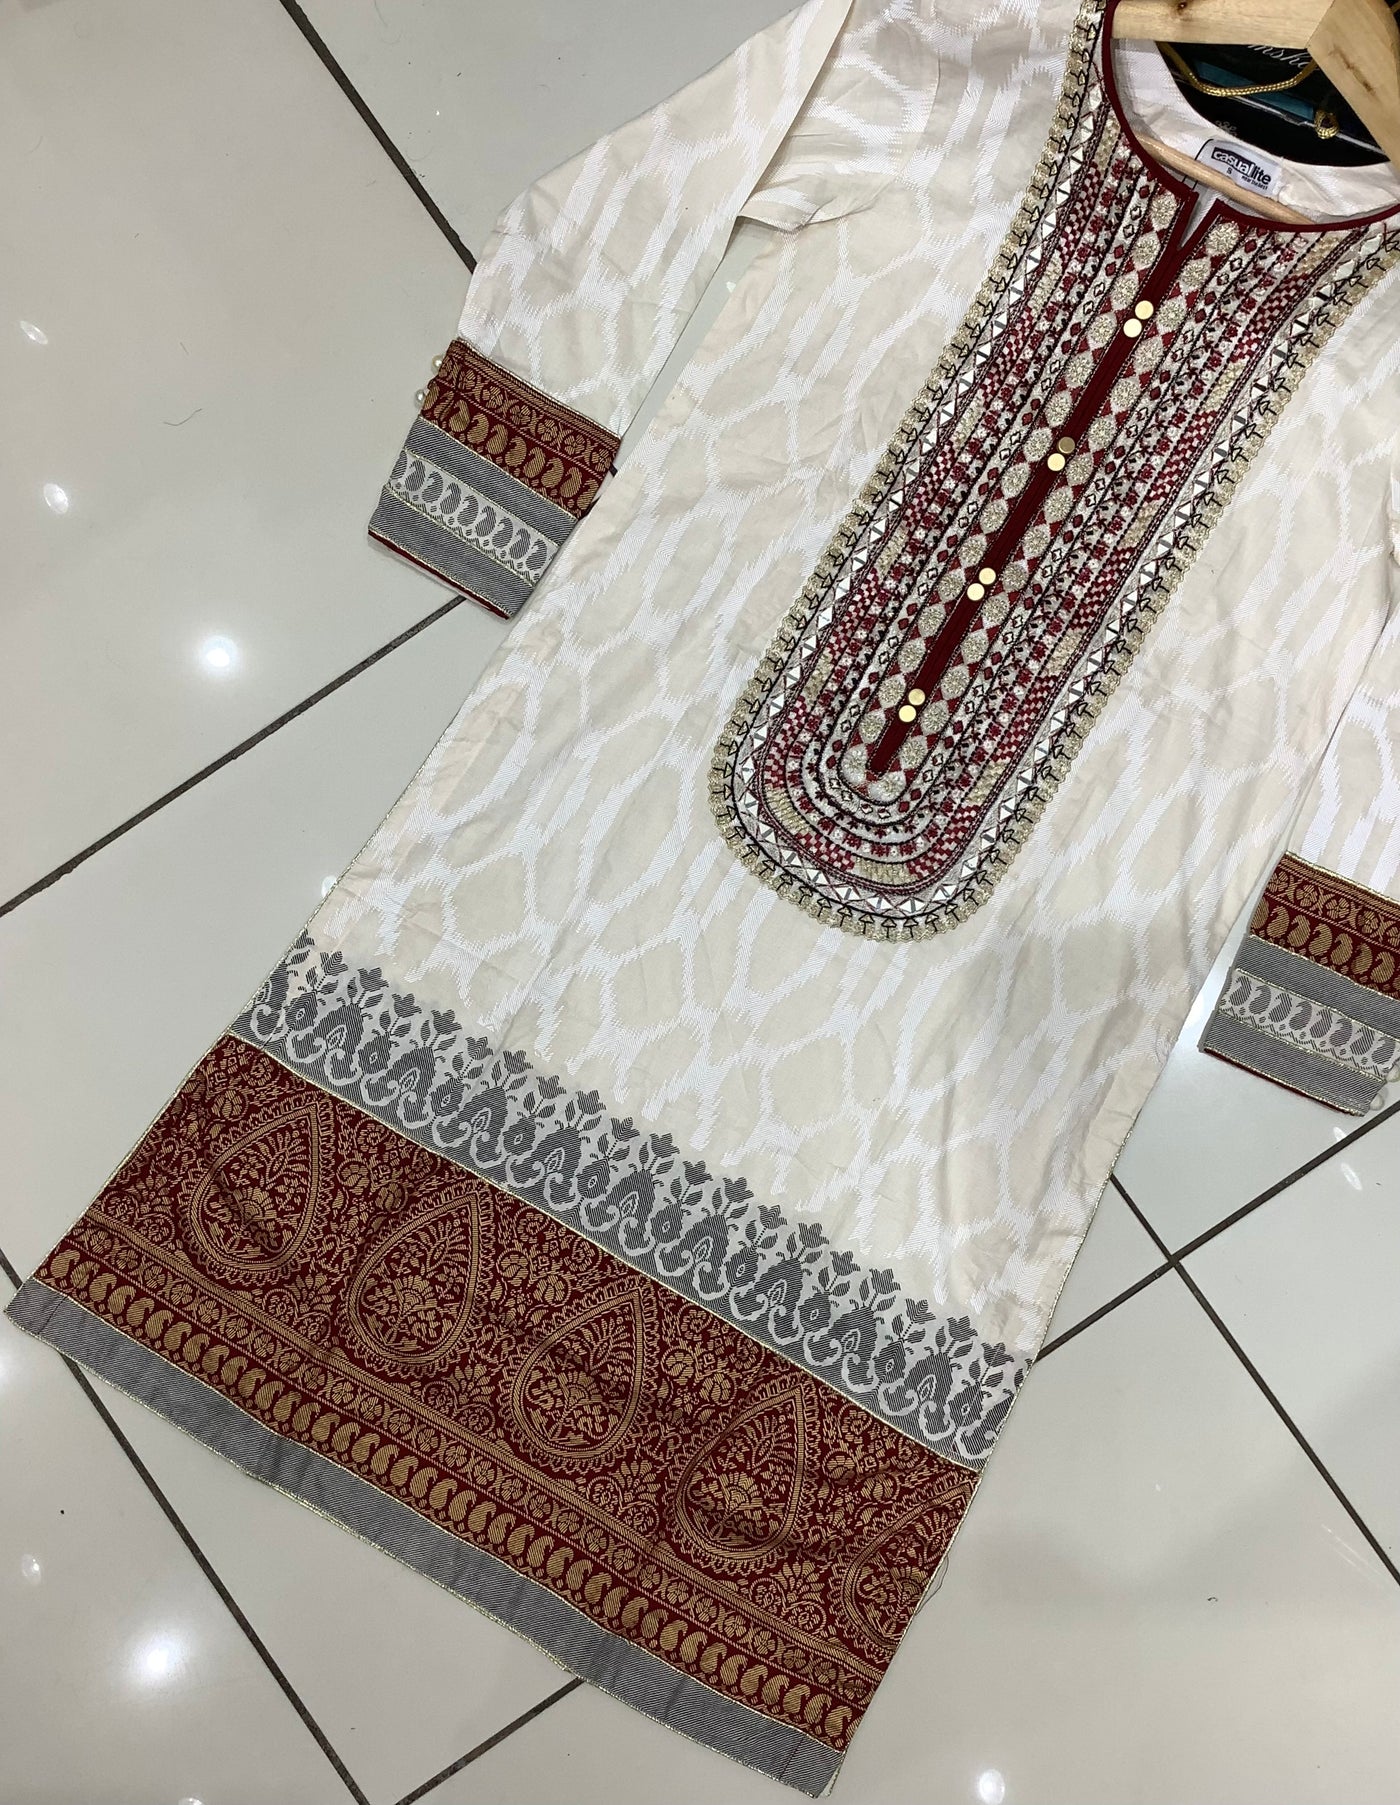  H.T Collections - Pakistani clothes